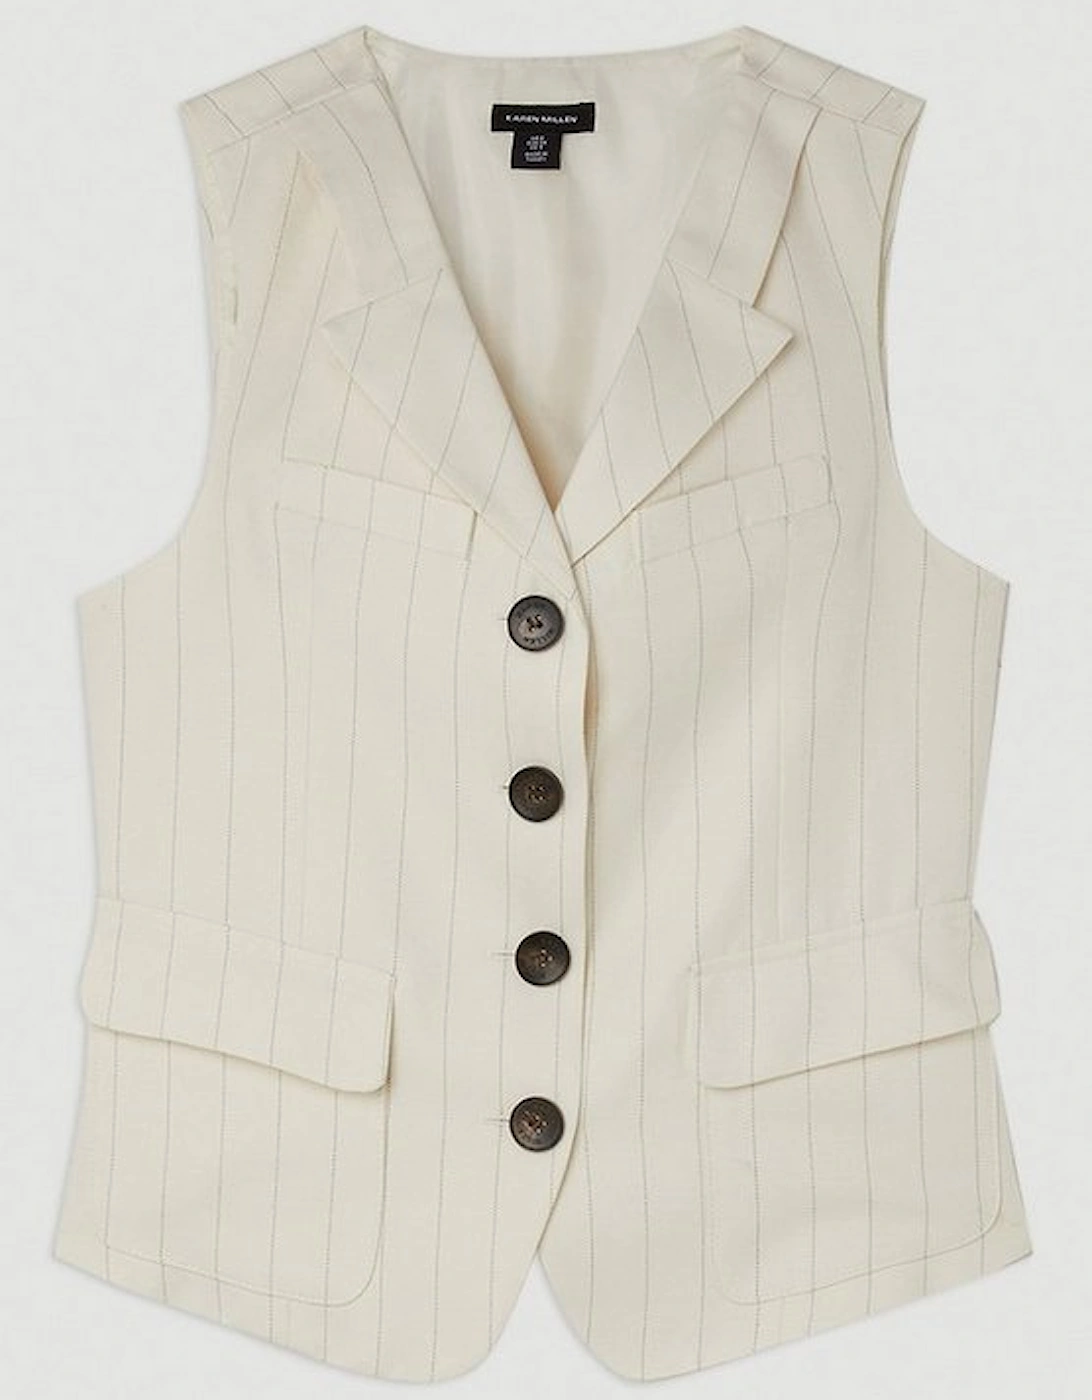 The Founder Striped Pocket Detail Single Breasted Waistcoat